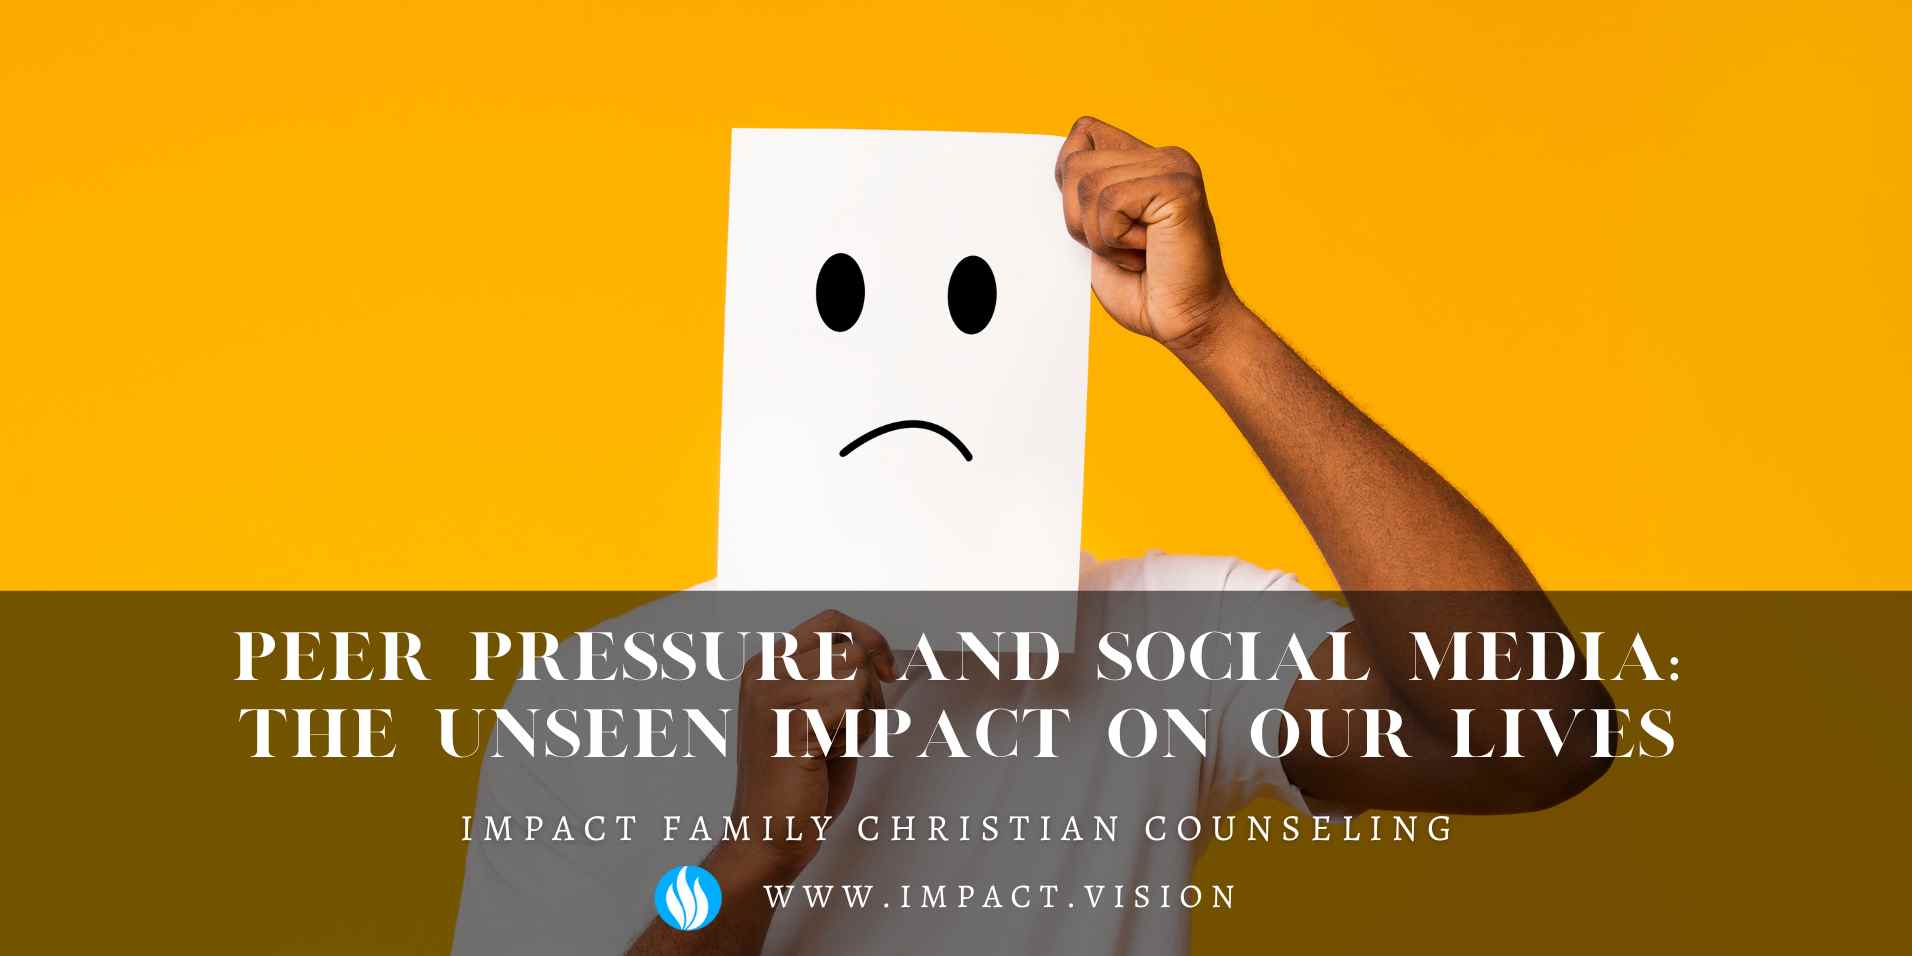 Peer Pressure and Social Media: The Unseen Impact on Our Lives